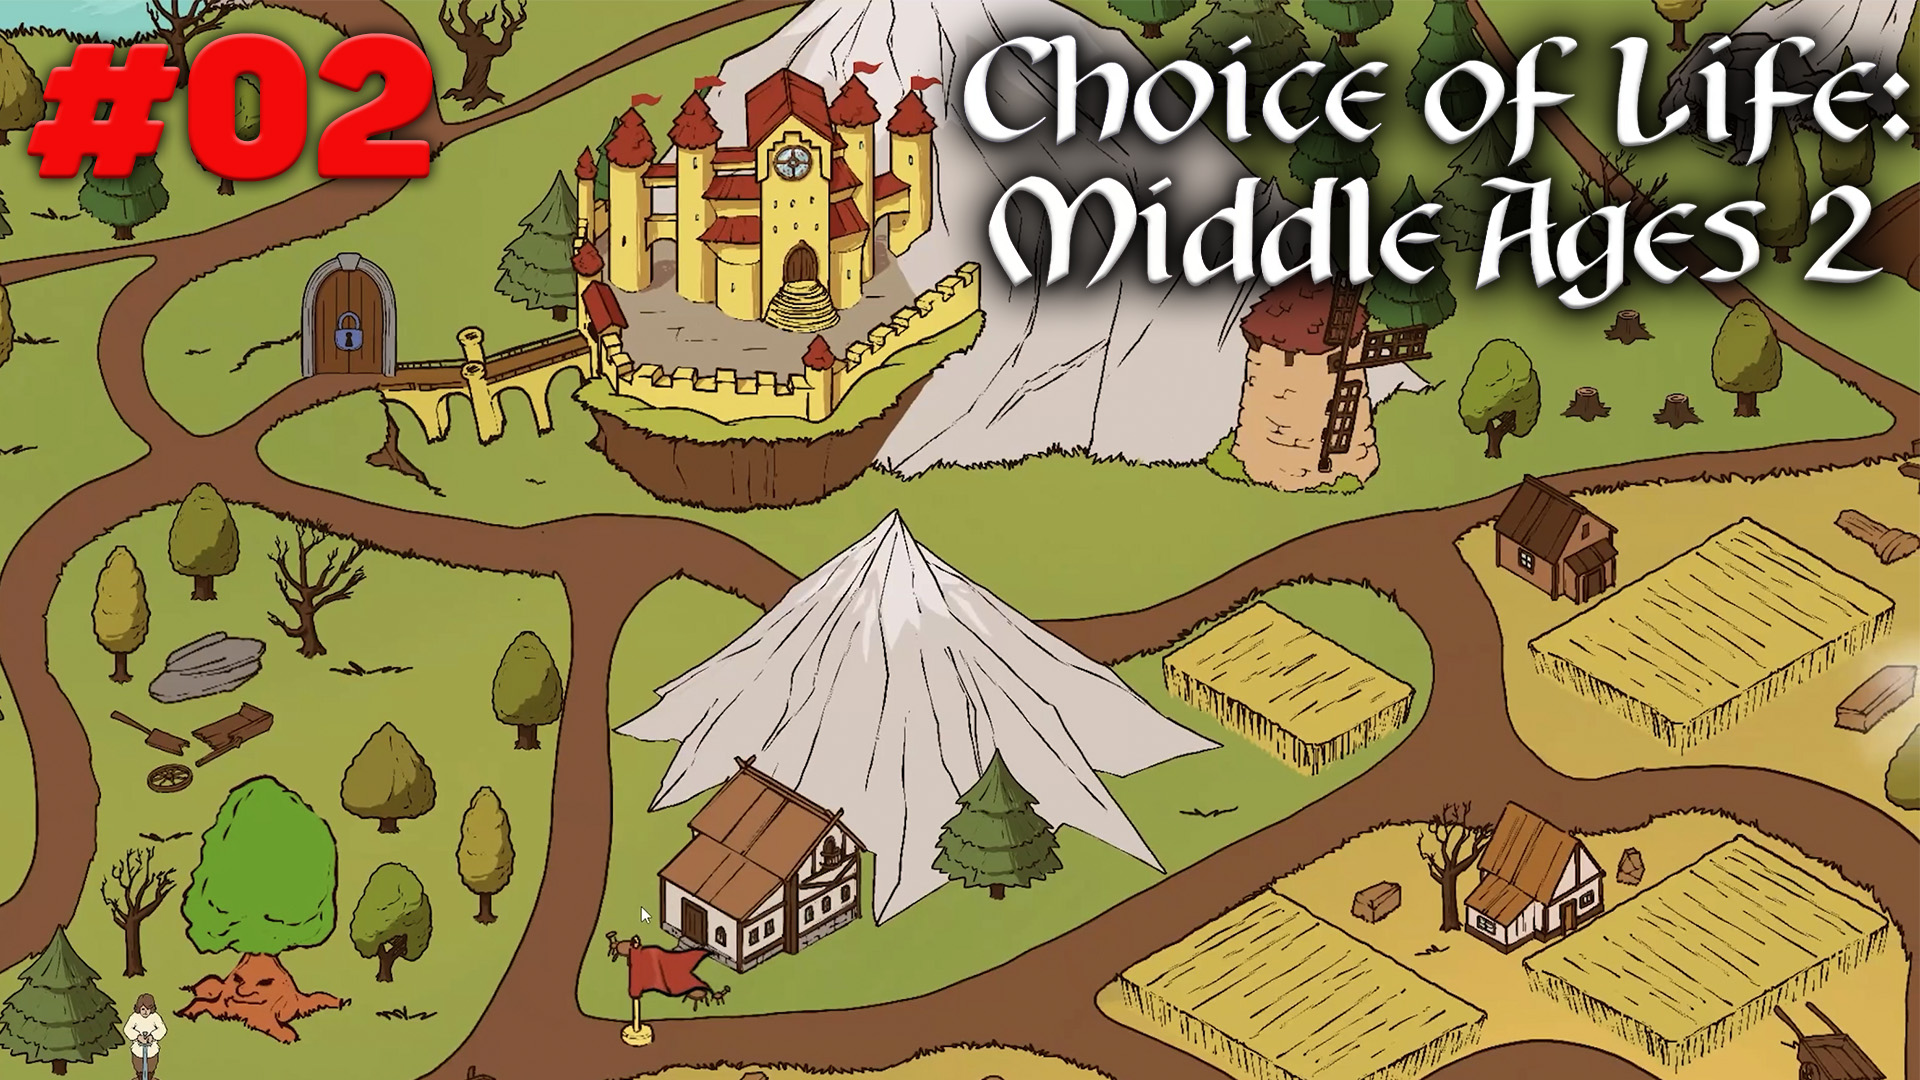 Choice of life игра. The choice of Life Middle ages игра. Choice of Life: Middle ages 2. Серпантина choice of Life Middle ages 2. Choice of Life: Middle ages 2 Элис.